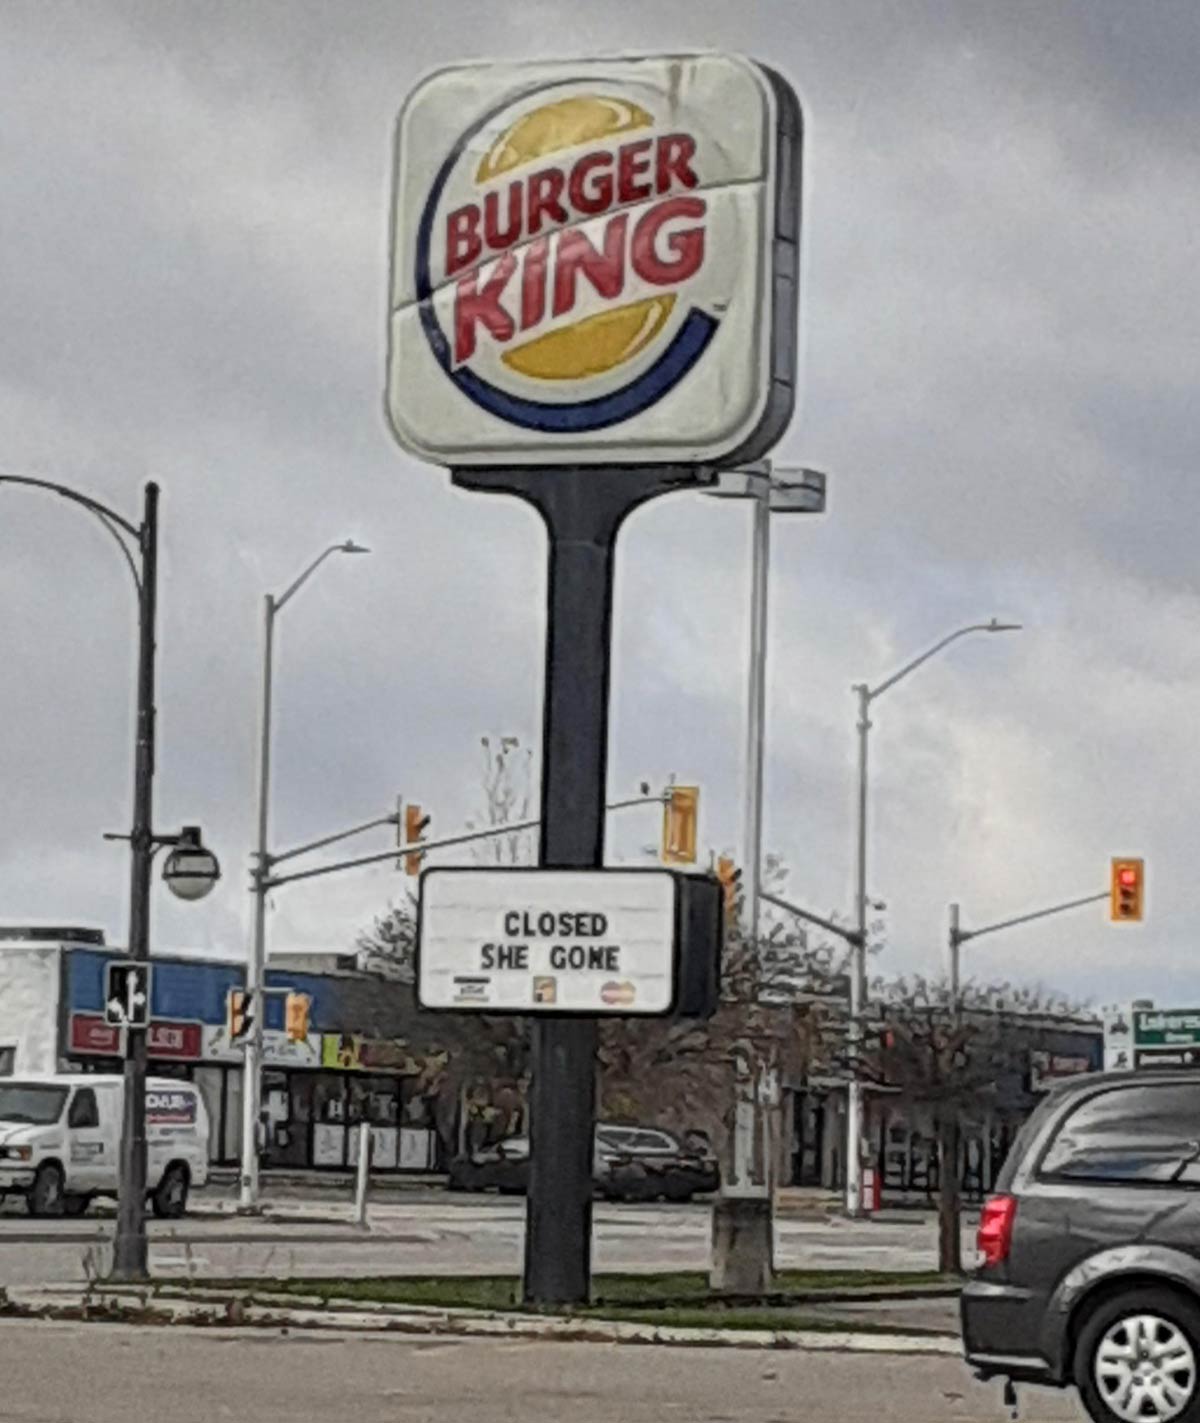 At the local burger king that closed recently